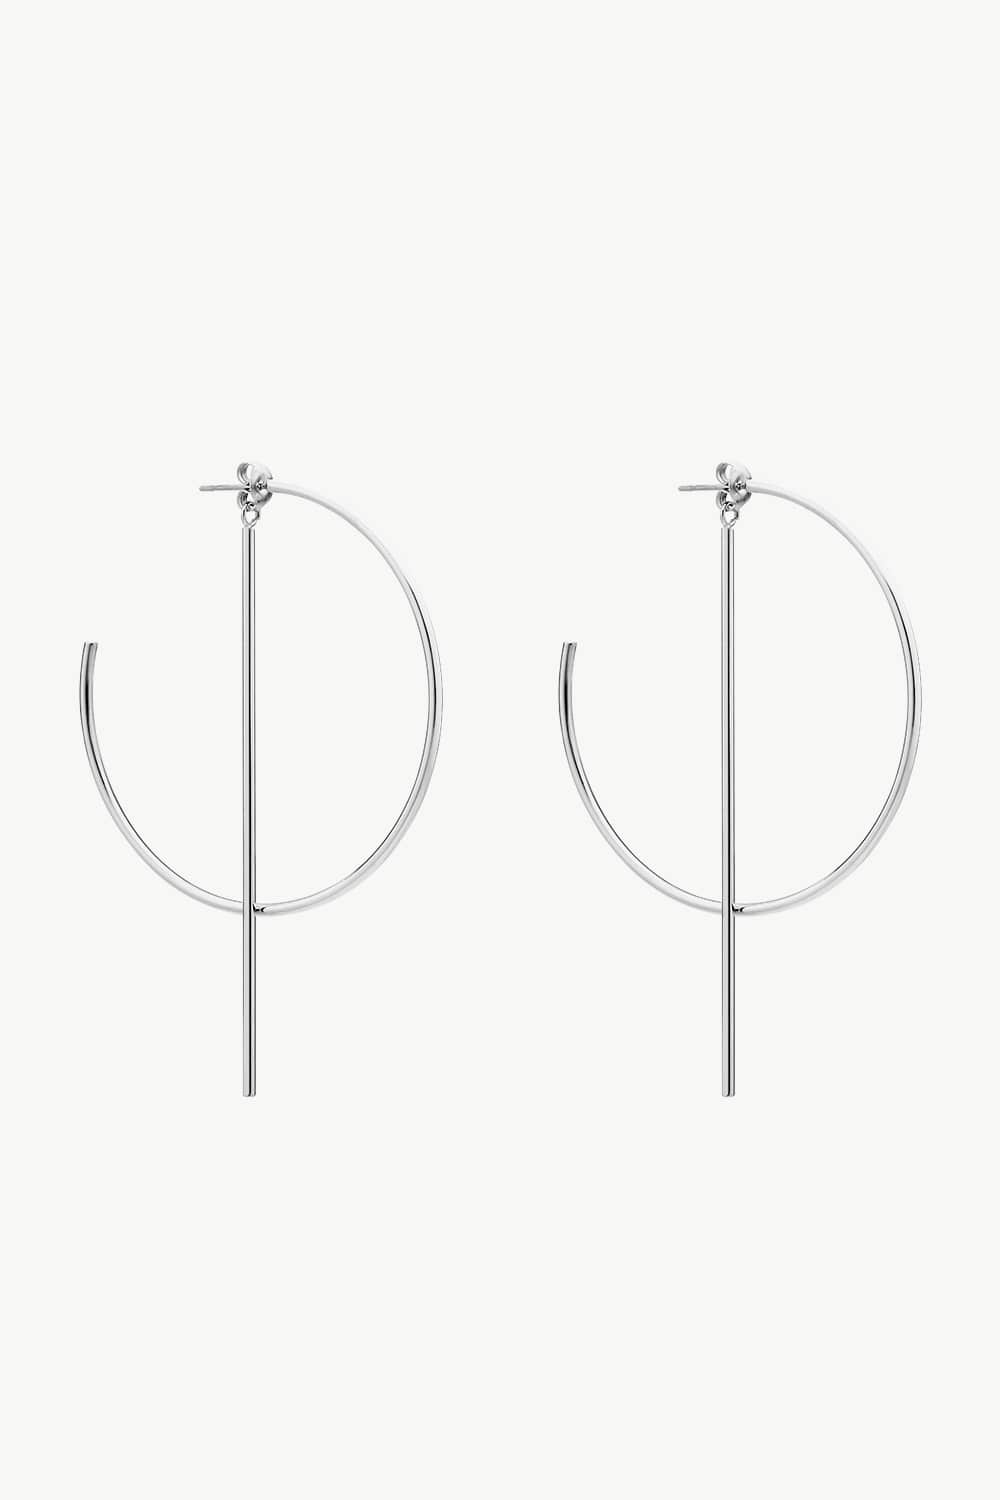 Eternal Love - Embrace Timeless Elegance with C-Hoop Stainless Steel Earrings - Radiate Romance and Confidence - Guy Christopher